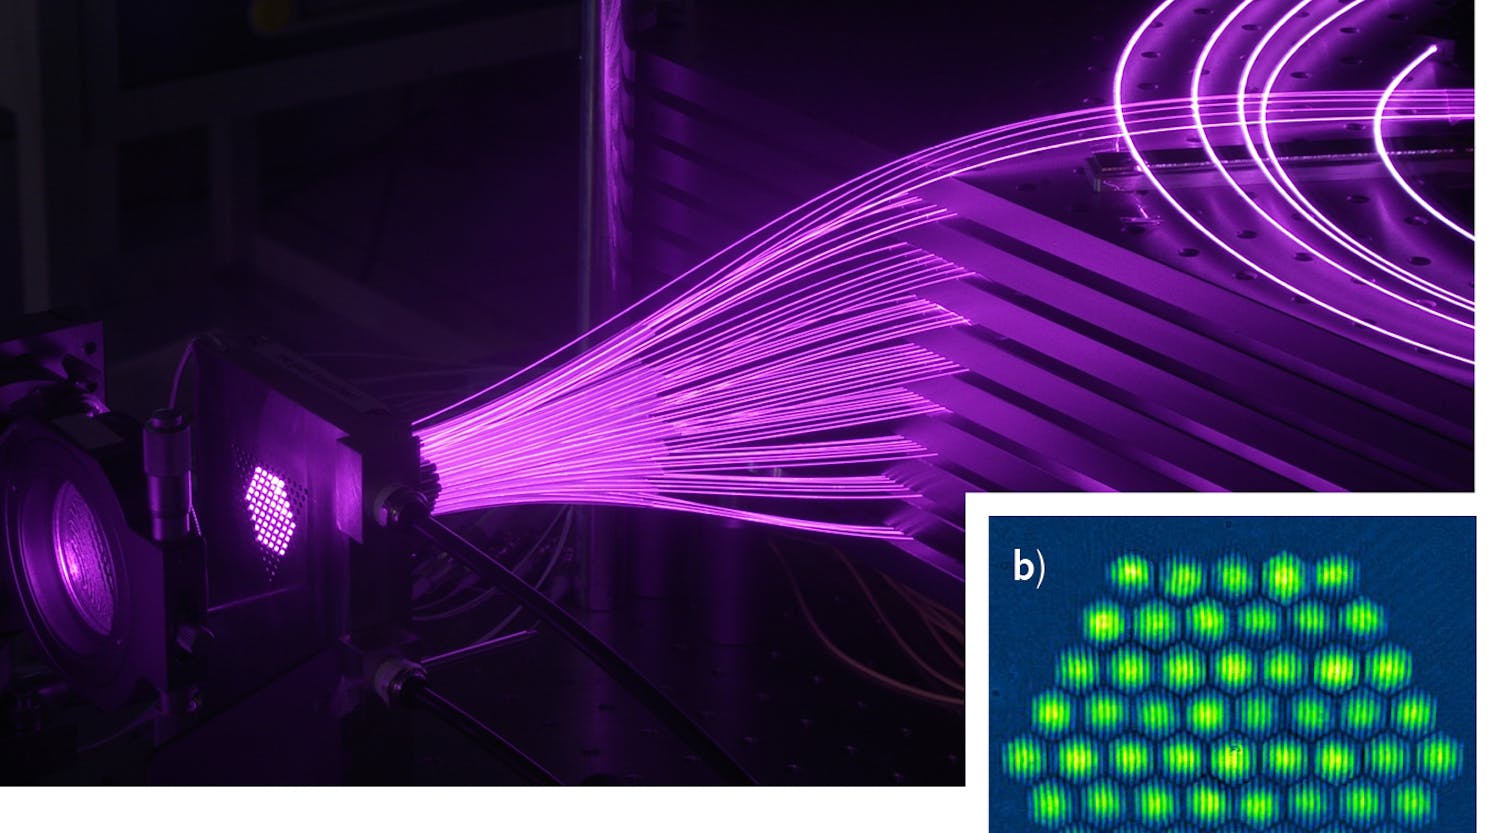 FIGURE 1. Shown are XCAN&rsquo;s 61 Yb-doped fiber amplifier bundle (a) and its near-field interference pattern (b).